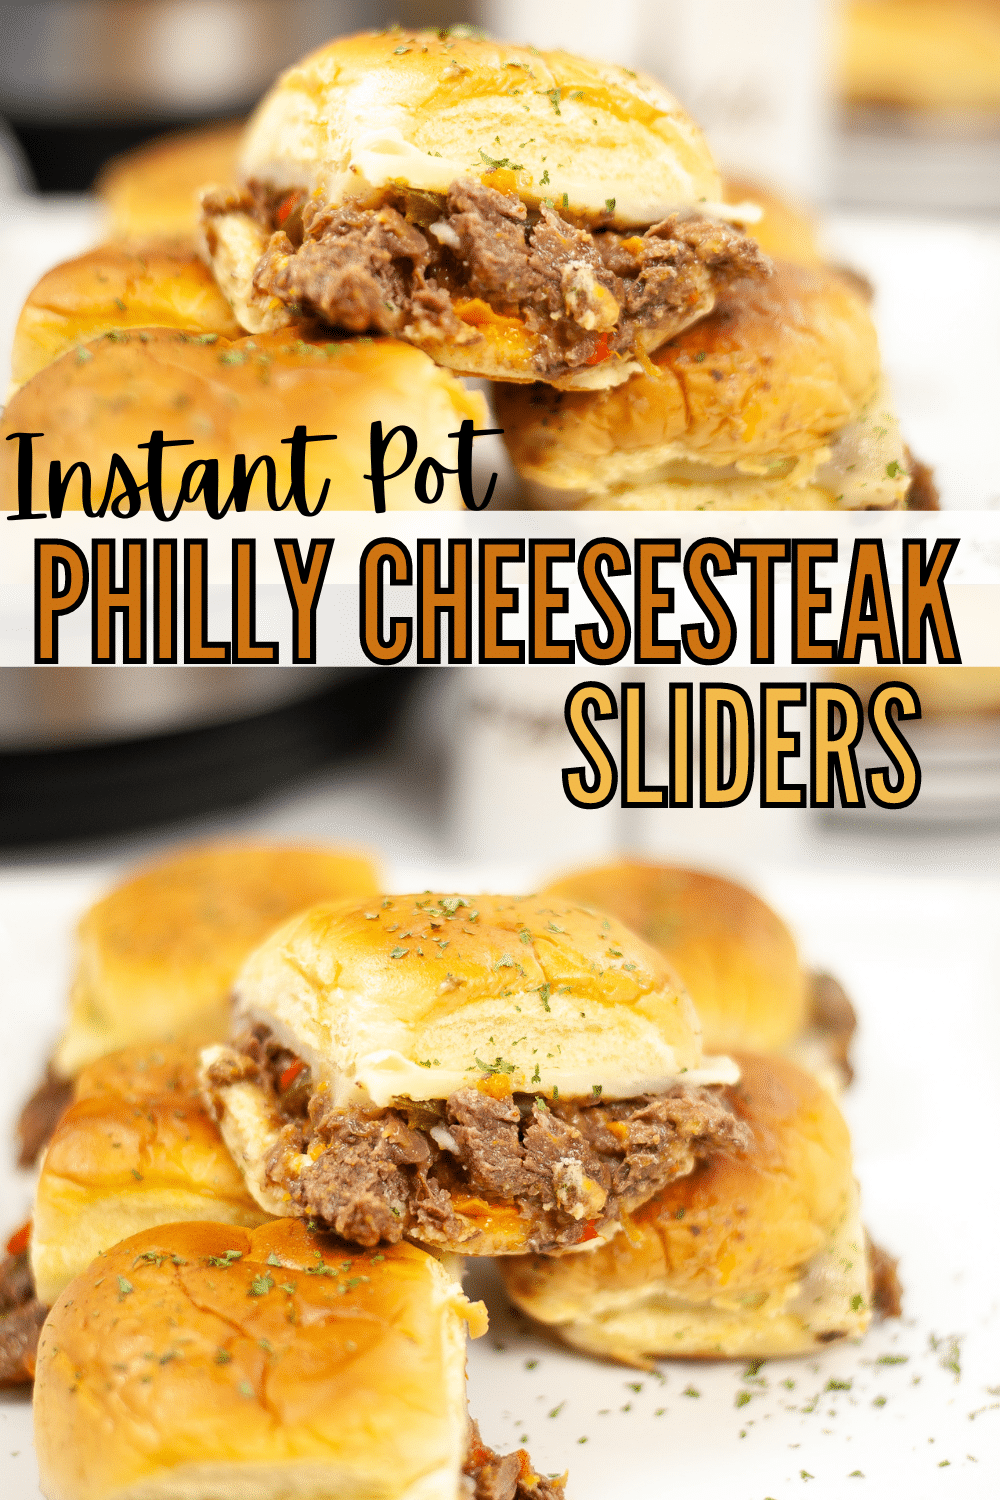 Instant Pot Philly Cheesesteak Sliders- Stack